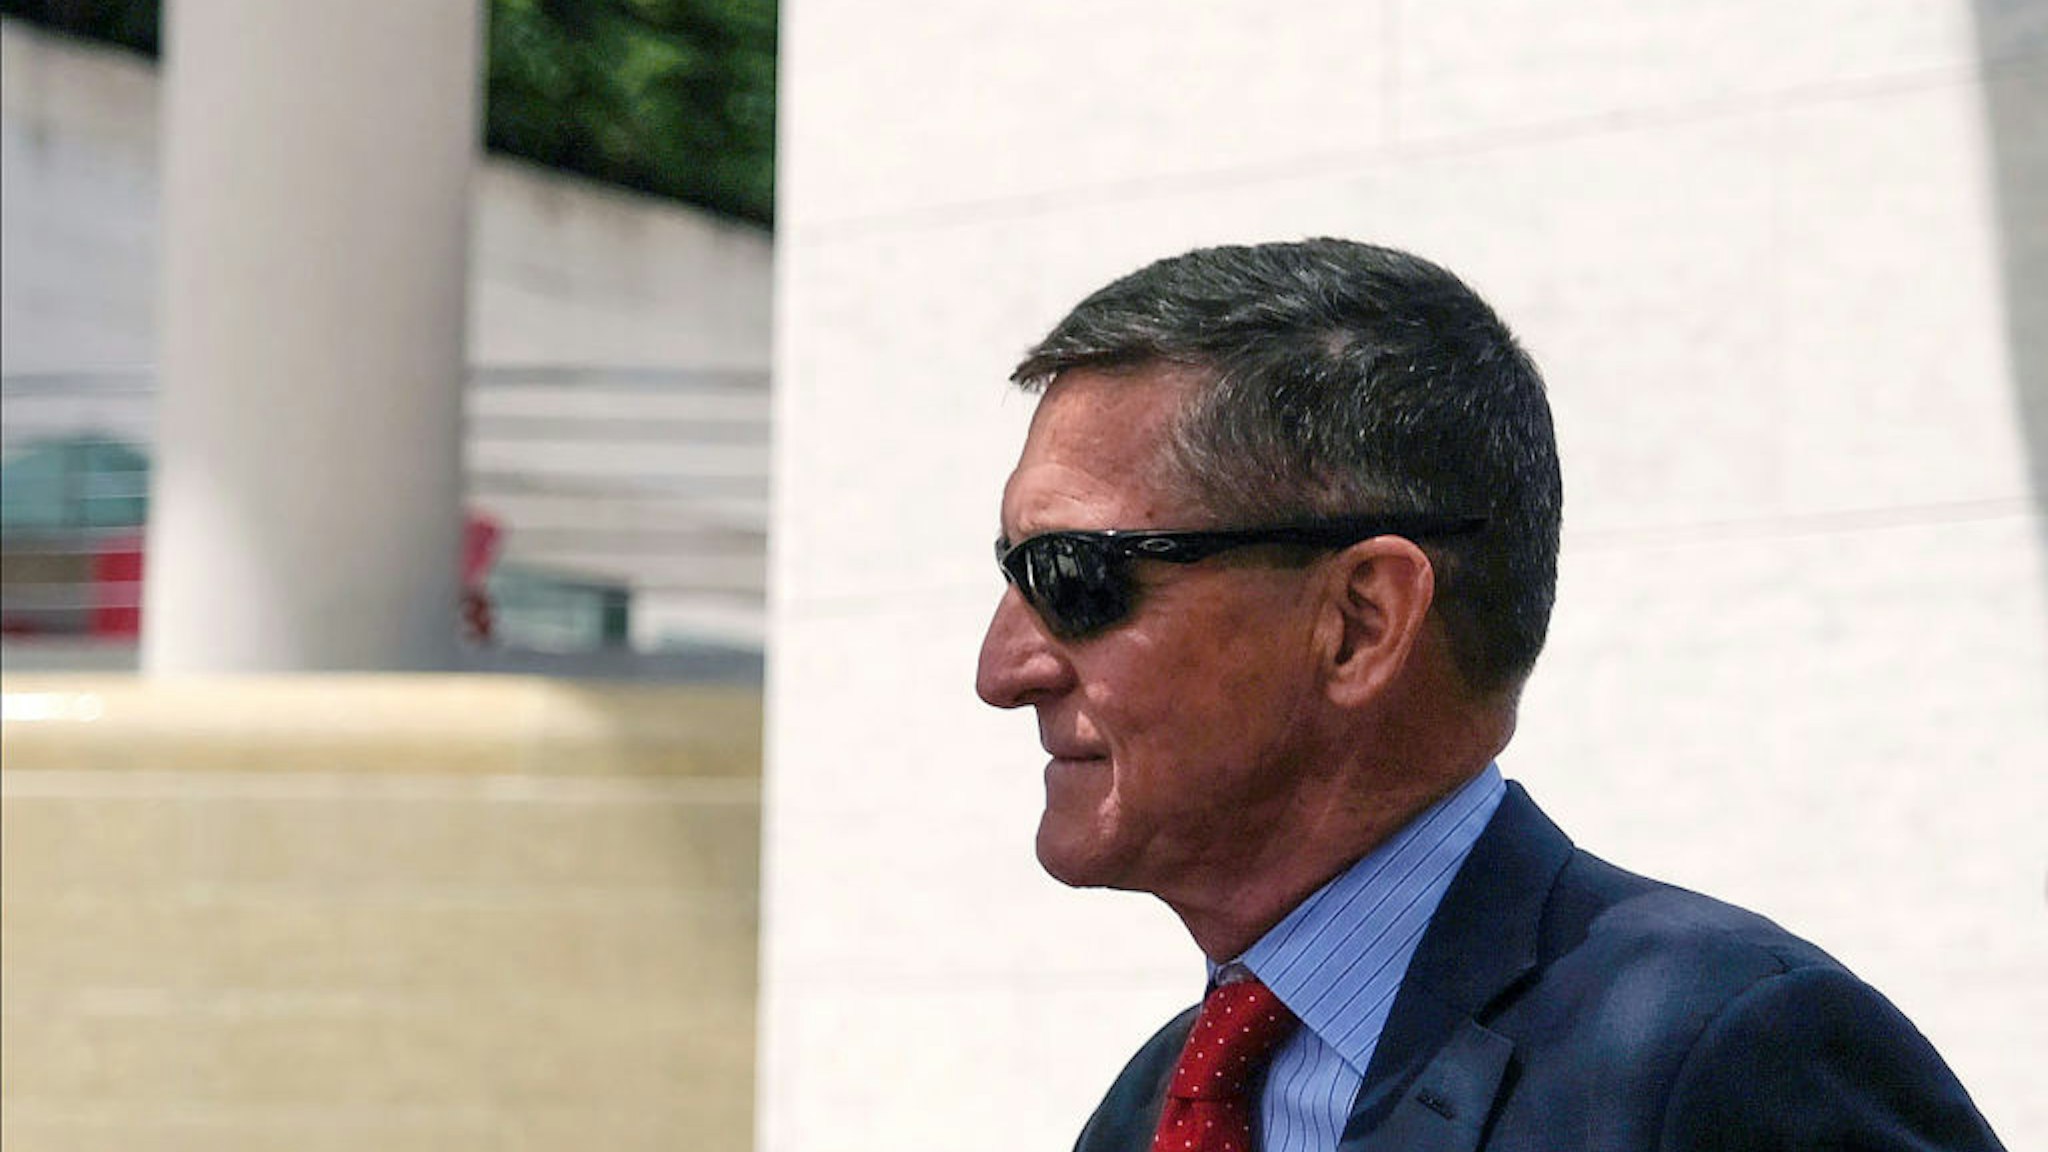 President Donald Trump’s former National Security Adviser Michael Flynn leaves the E. Barrett Prettyman U.S. Courthouse on June 24, 2019 in Washington, DC. Criminal sentencing for Flynn will be on hold for at least another two months.